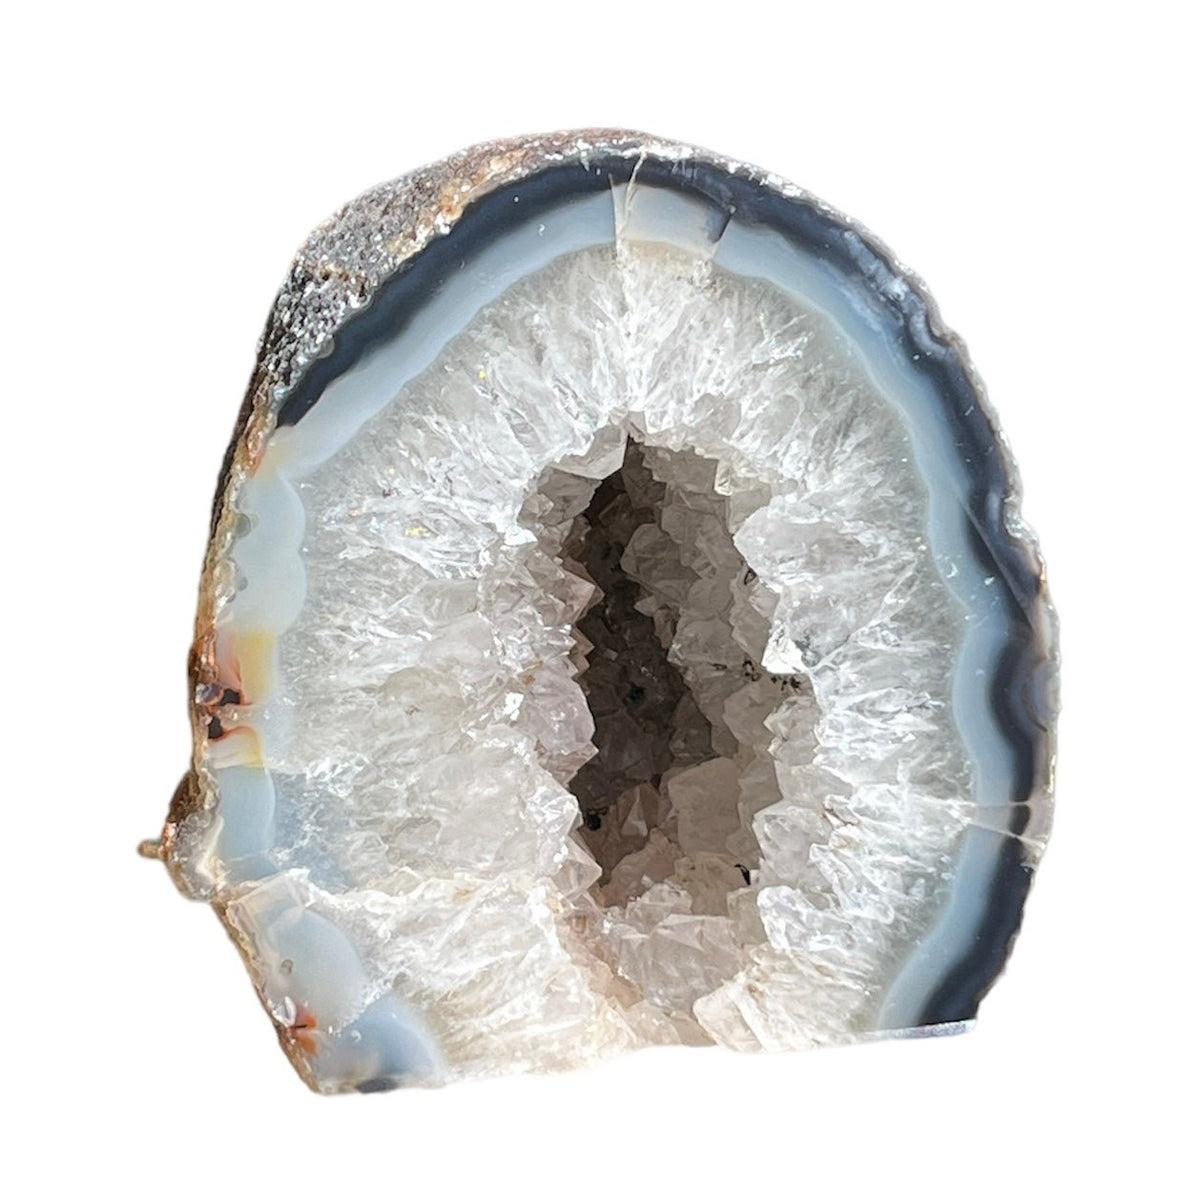 AGATE GEODE Teal 2 4-7 Oz Large Polished Rocks Minerals Geodes Throat  Chakra Healing Crystals and Stones Natural Raw Specimen Reiki Xx -   Canada